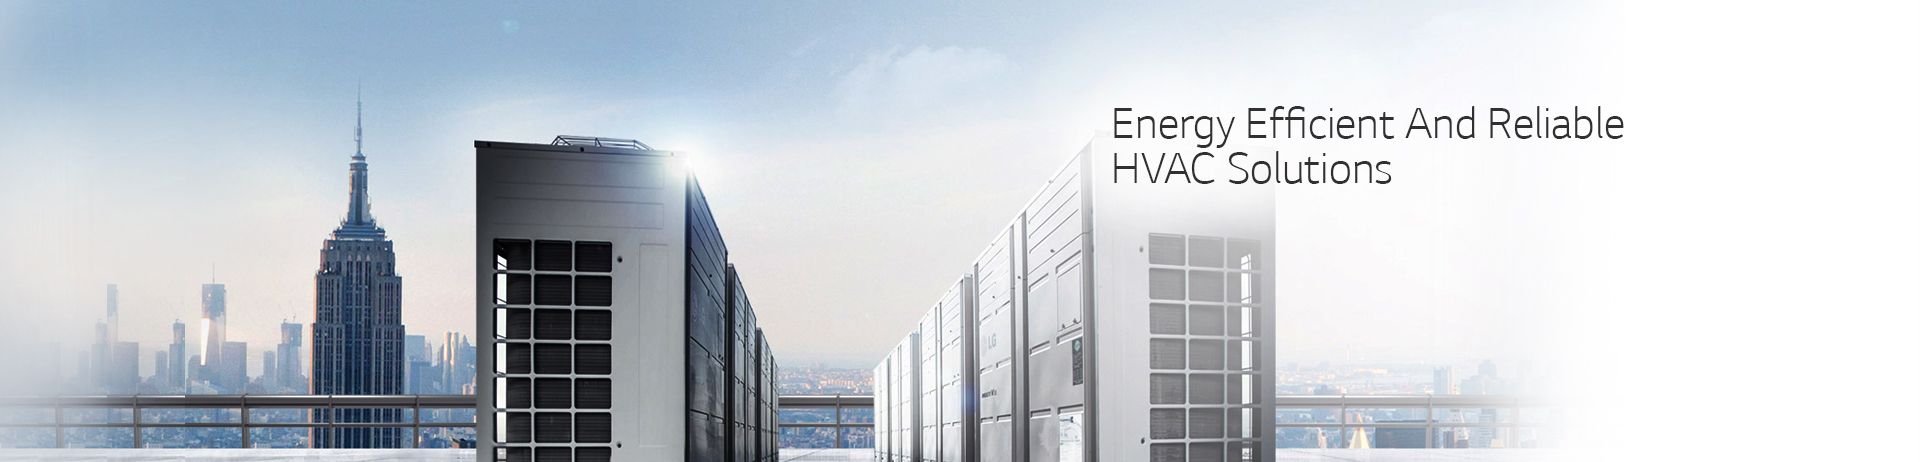 Energy Efficient and Reliable HVAC Solutions